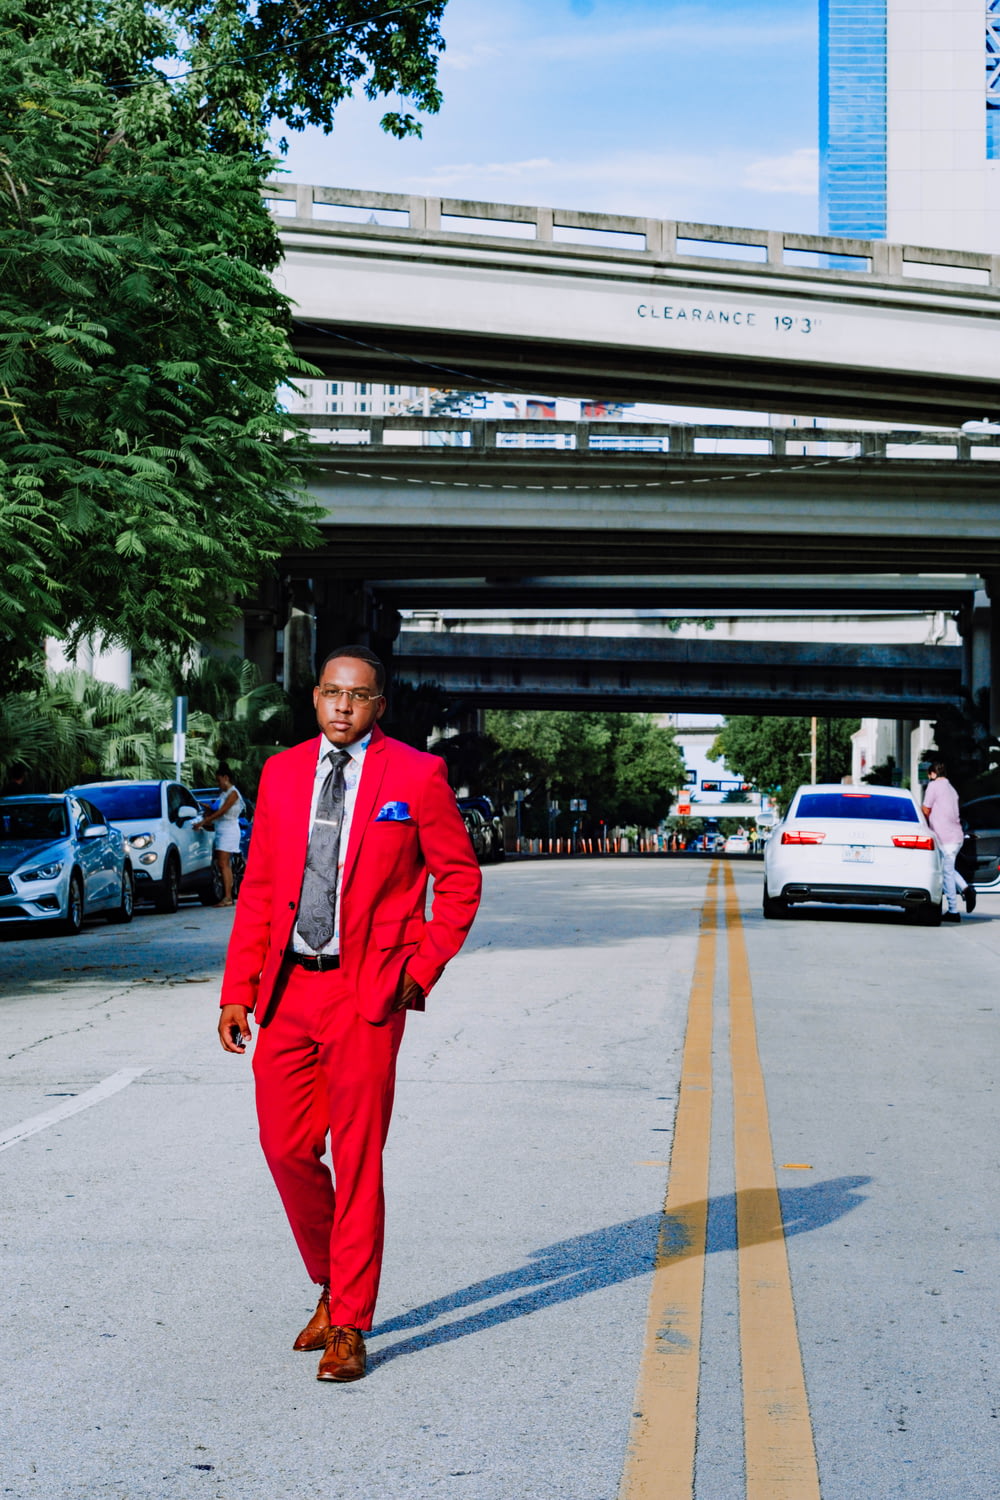 man in red suit standing on sidewalk during daytime